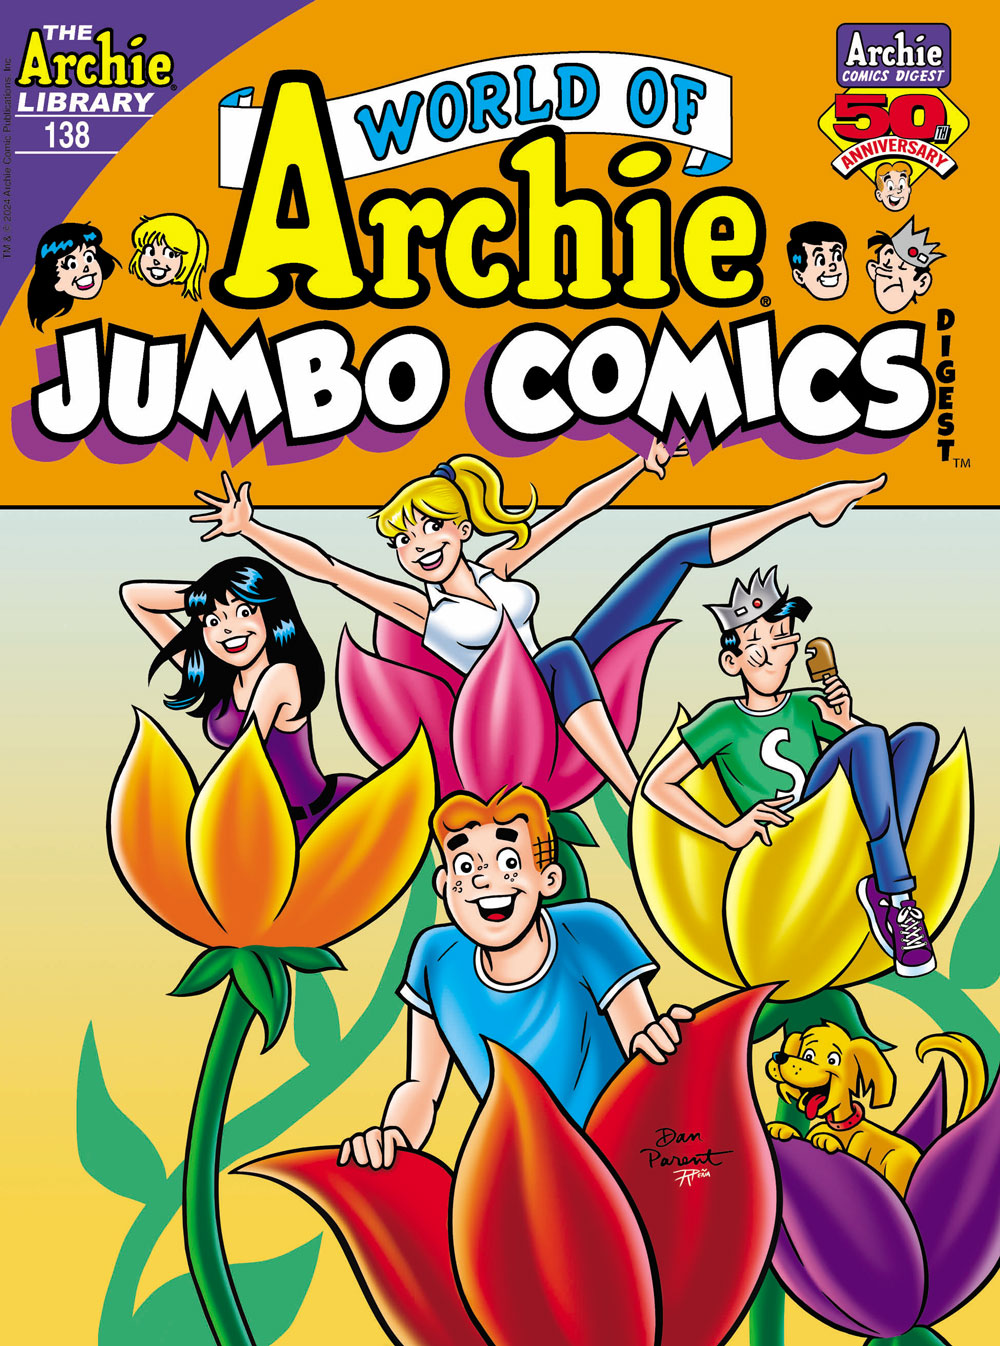 Cover of WORLD OF ARCHIE DIGEST #138. Archie and the gang lounge around inside giant tulip blossoms.